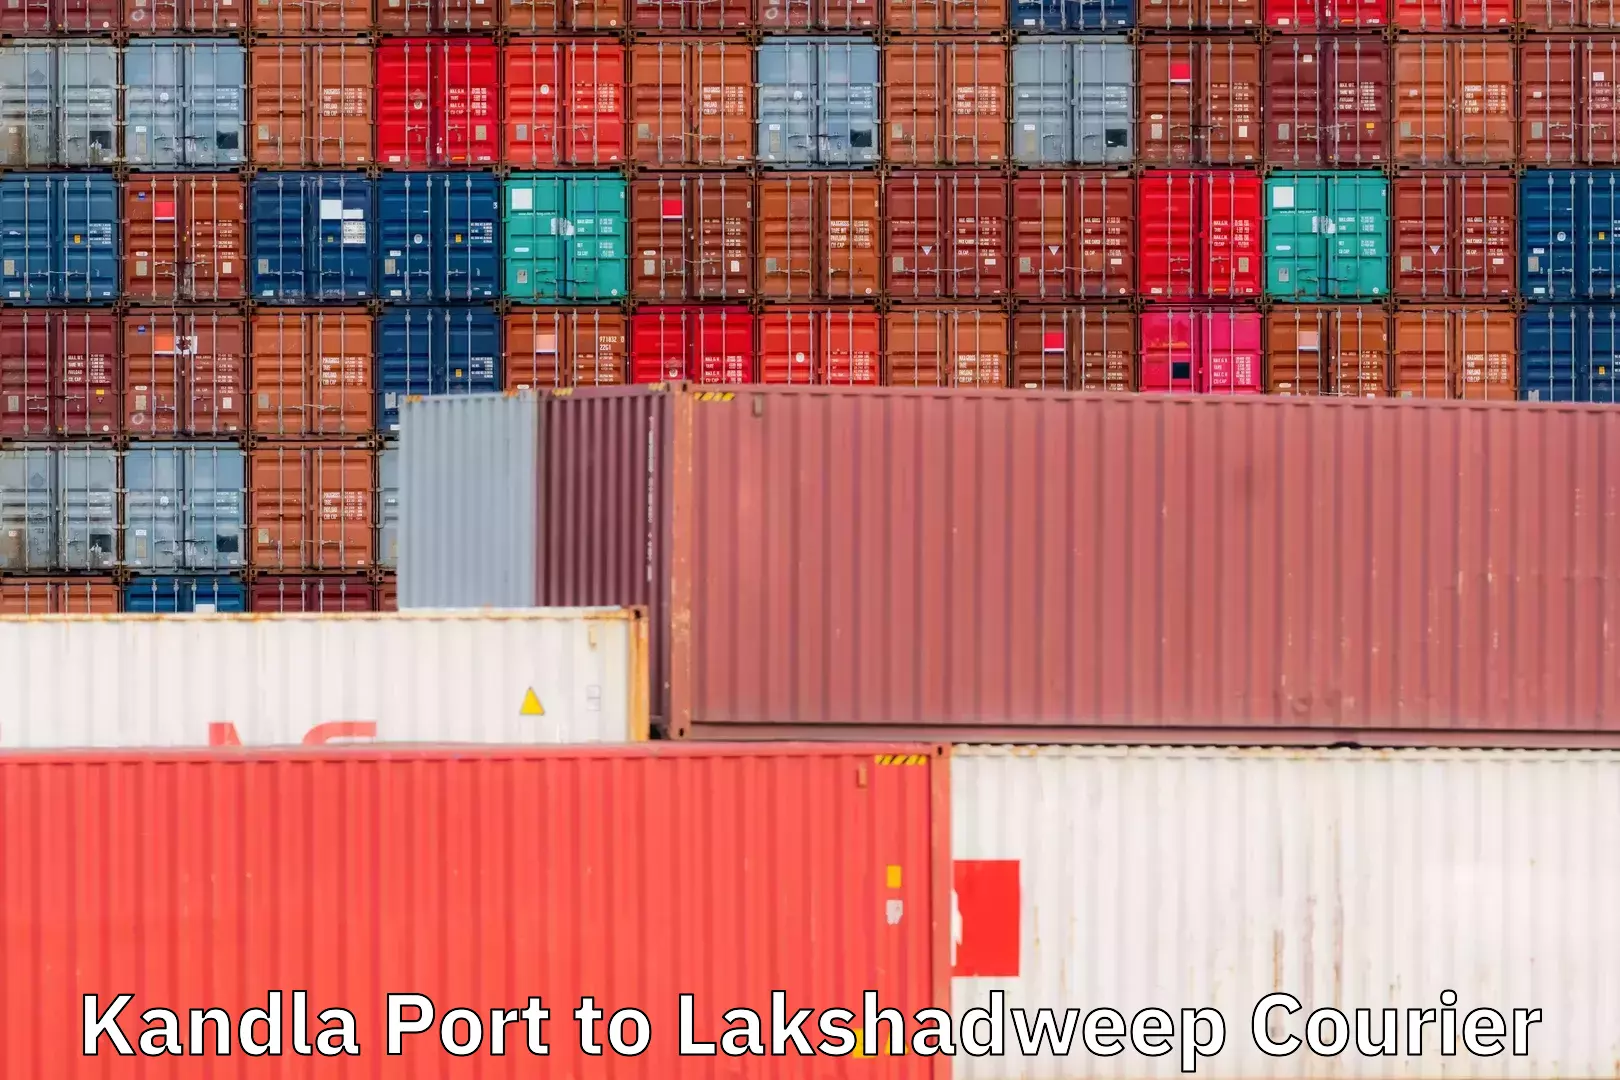 Streamlined delivery processes Kandla Port to Lakshadweep